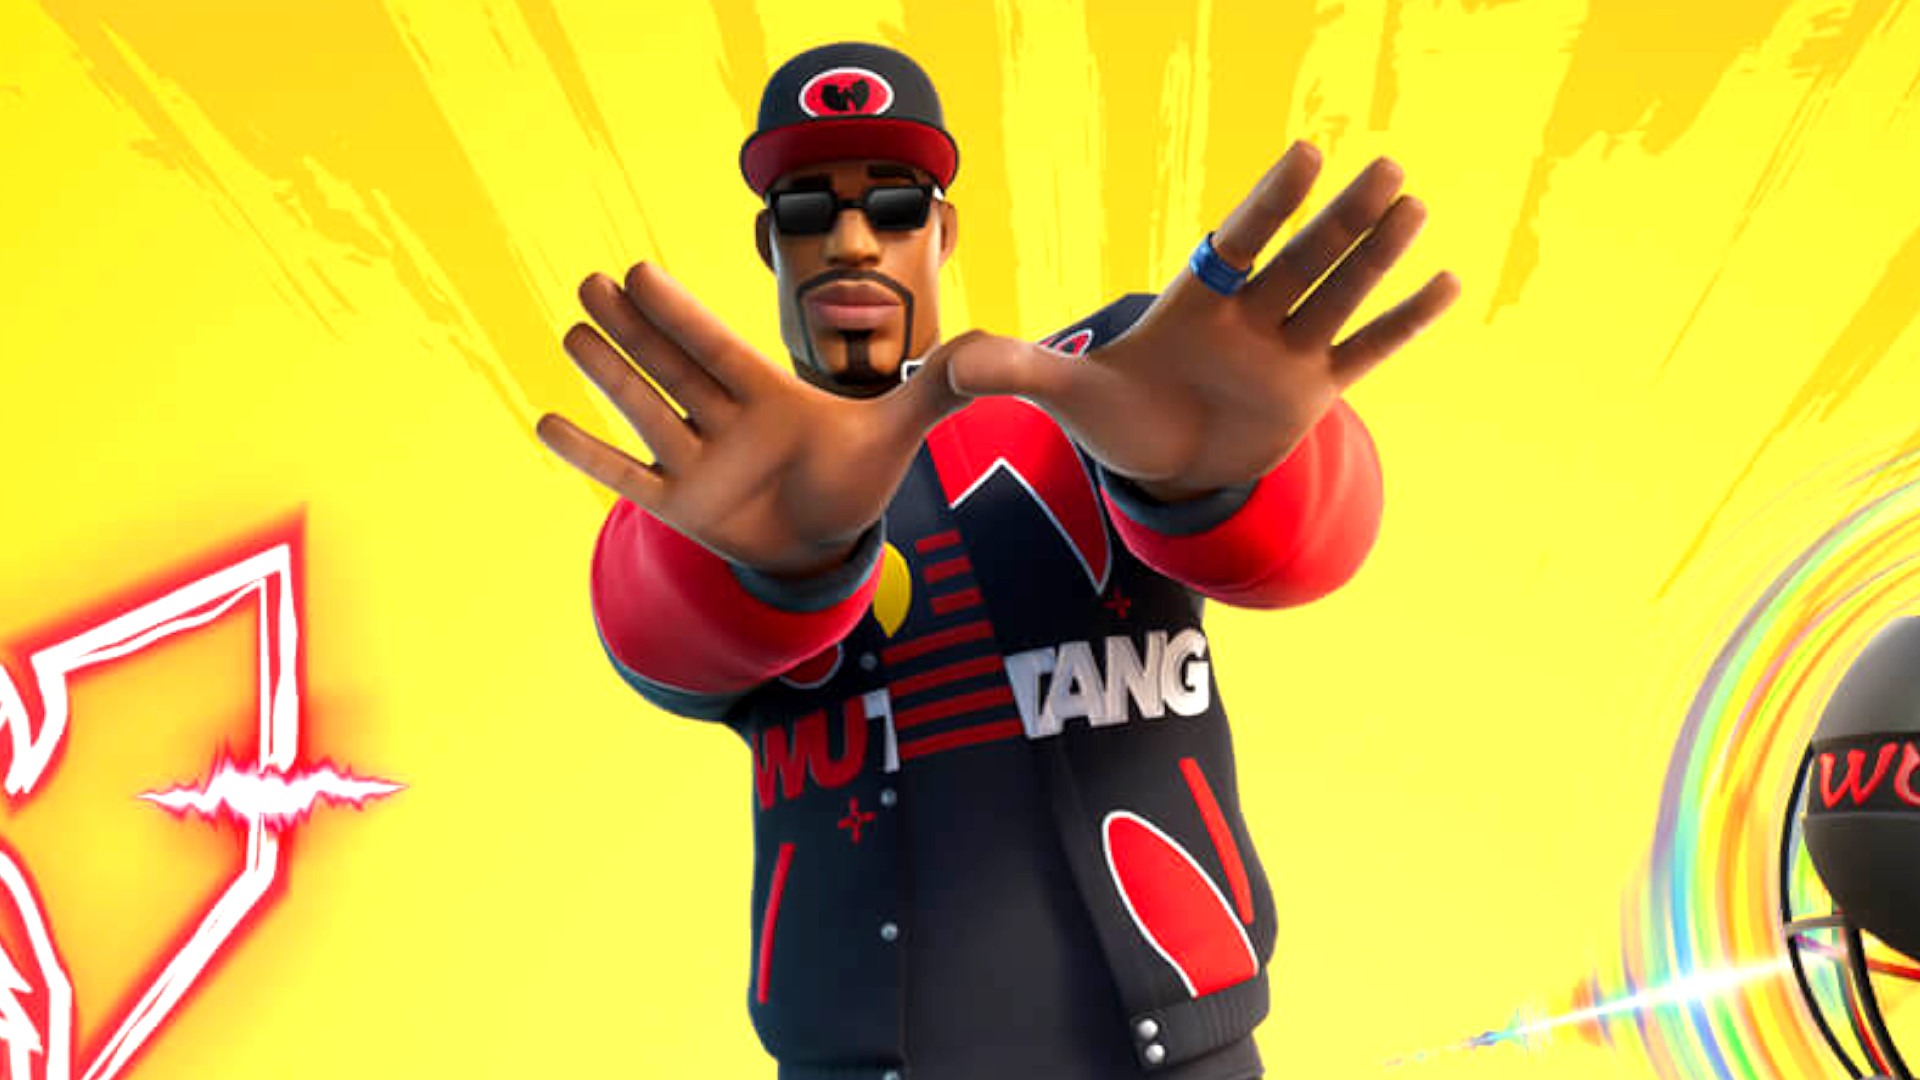 Fortnite is getting Wu-Tang Clan outfits and items